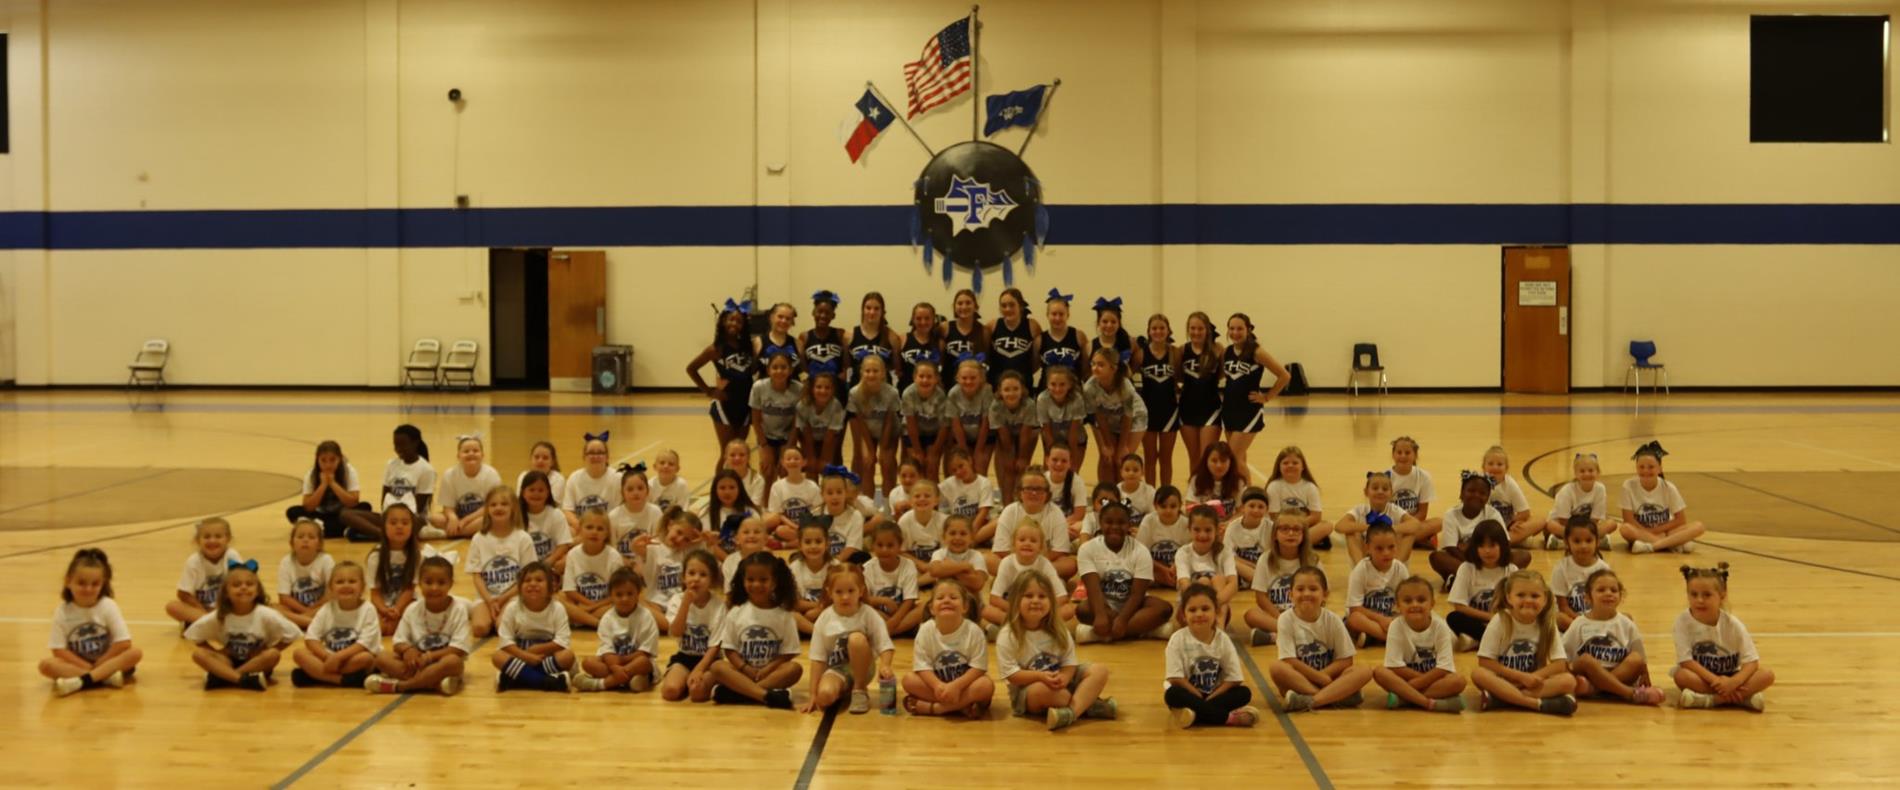 Cheer camp group picture